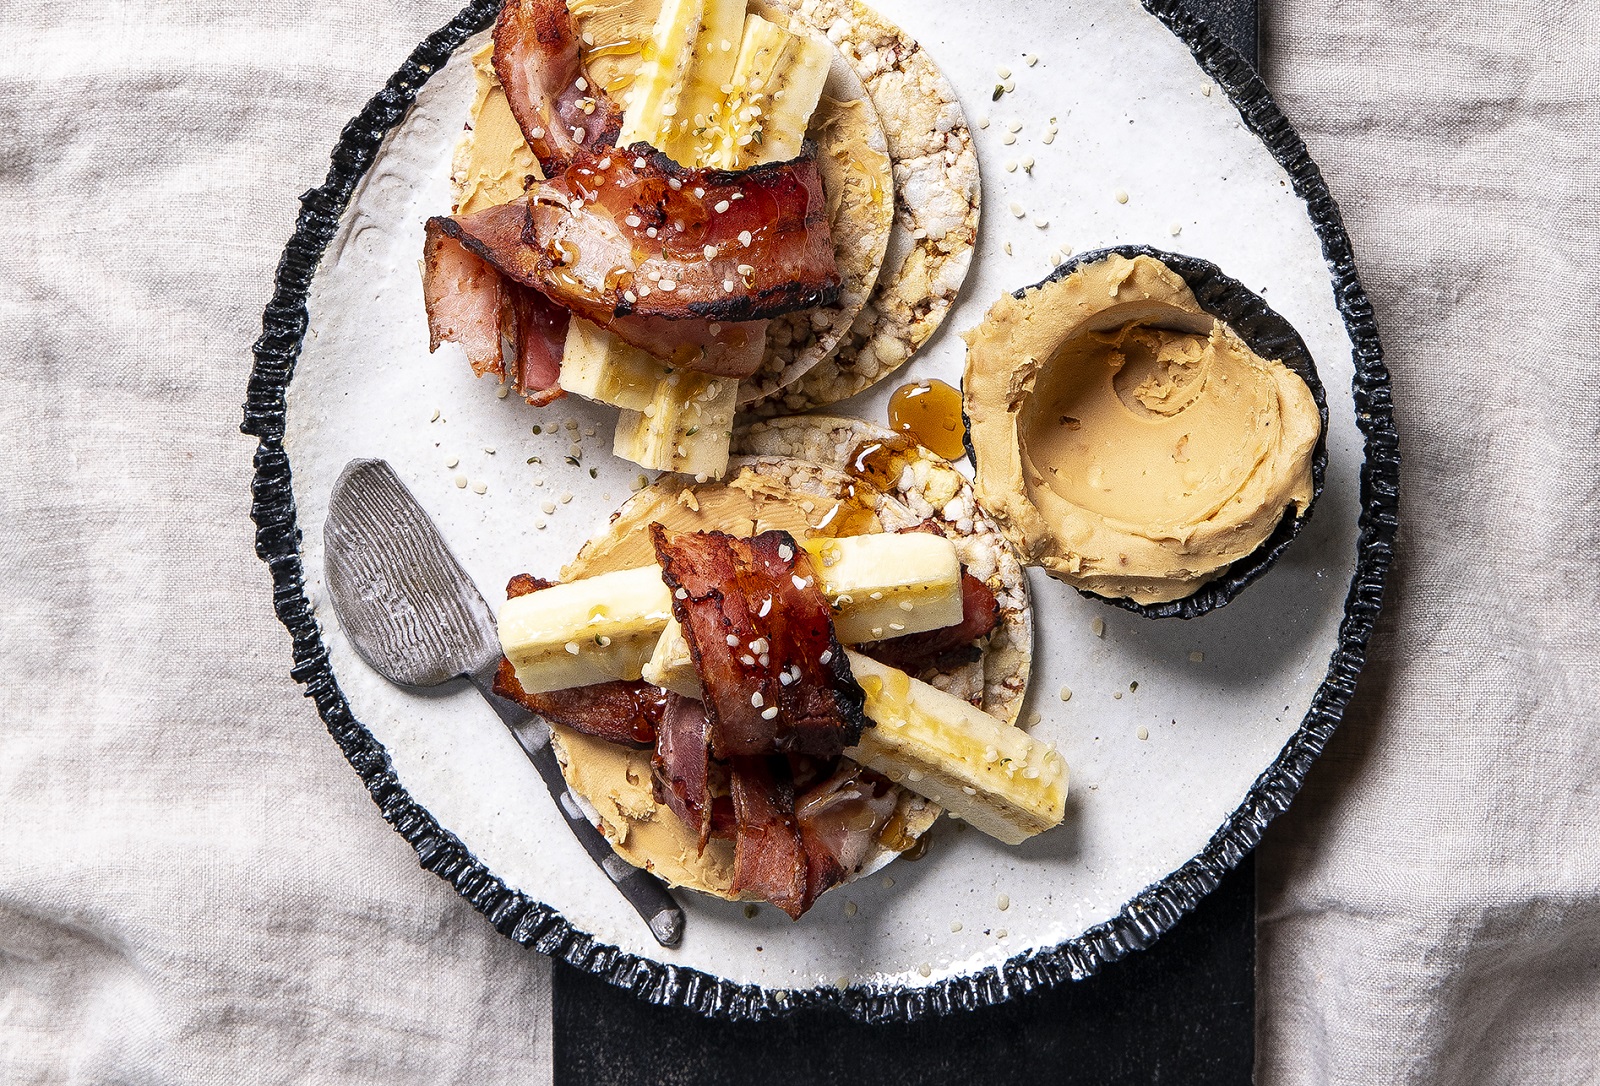 Peanut Butter, bacon, Banana & Maple on CORN THINS slices